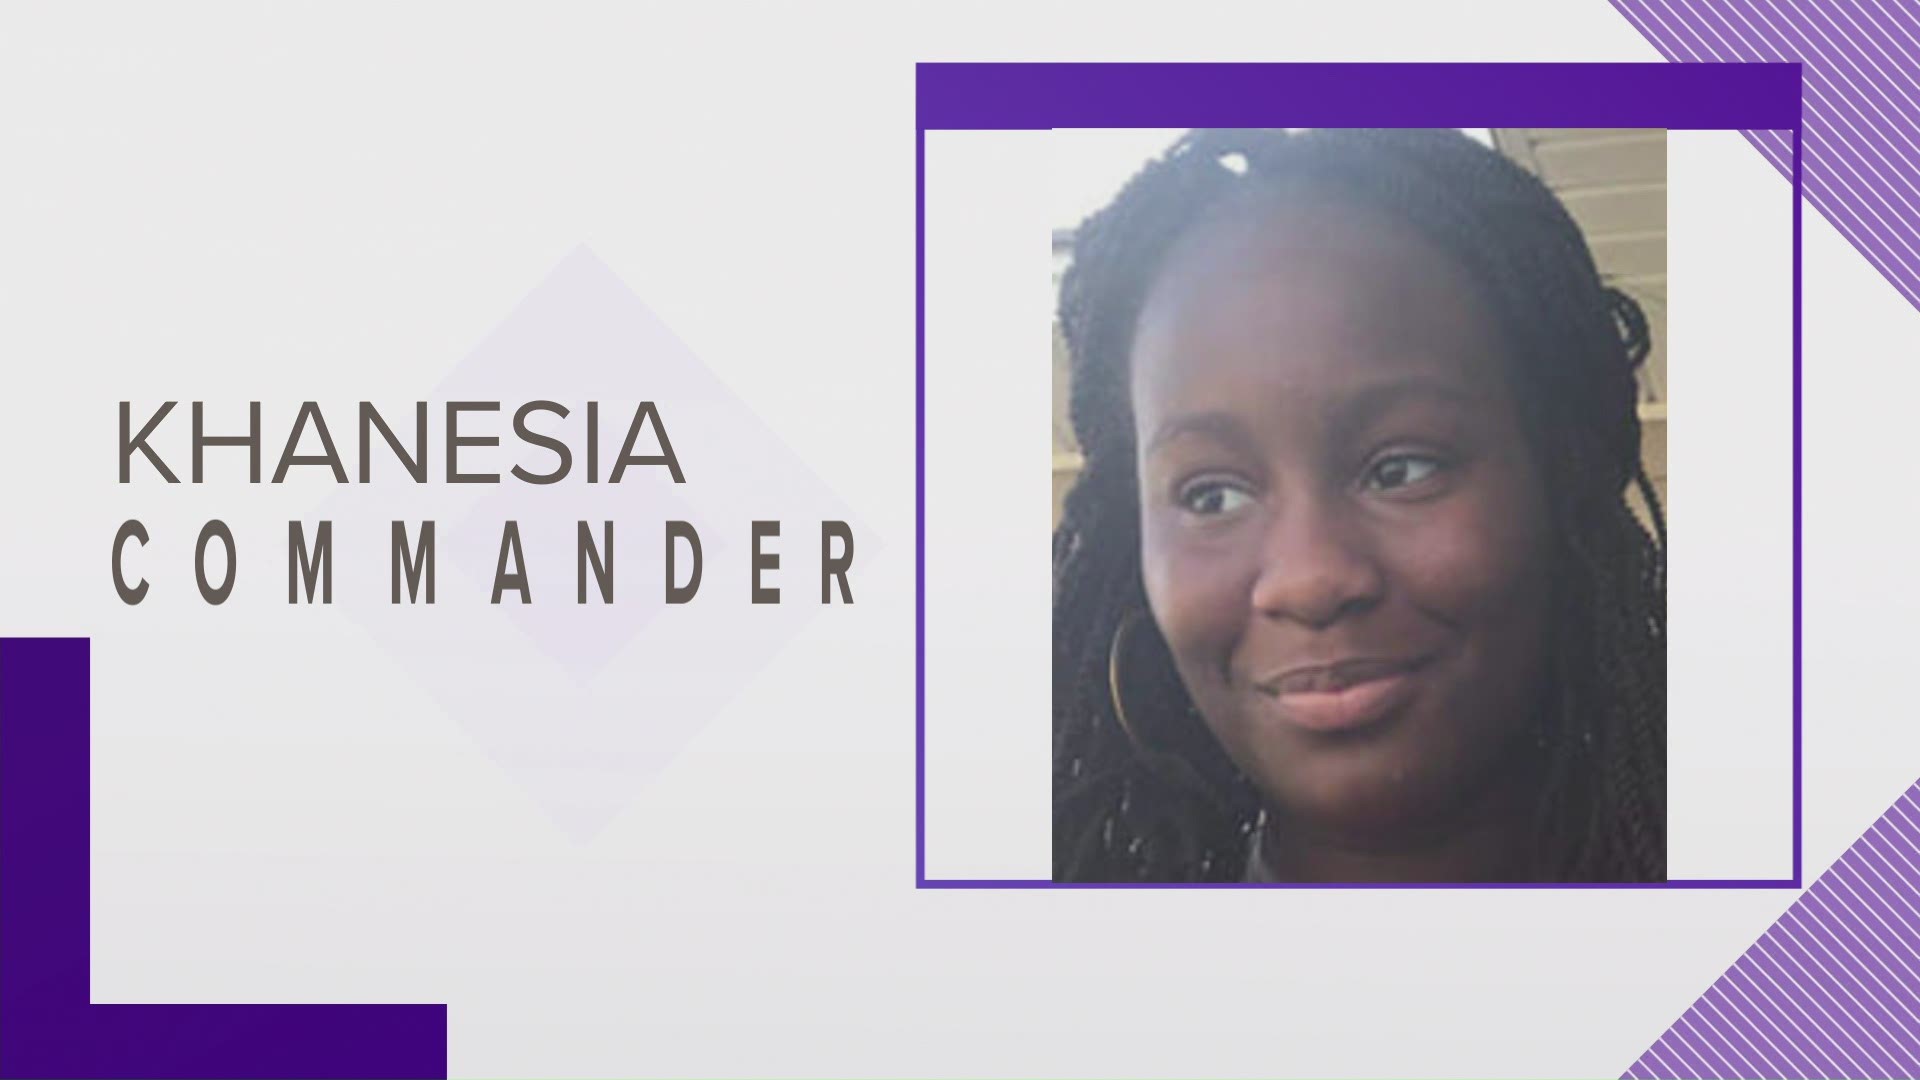 Khanesia Commander, 14 was last seen Saturday at her home on Athena Court.